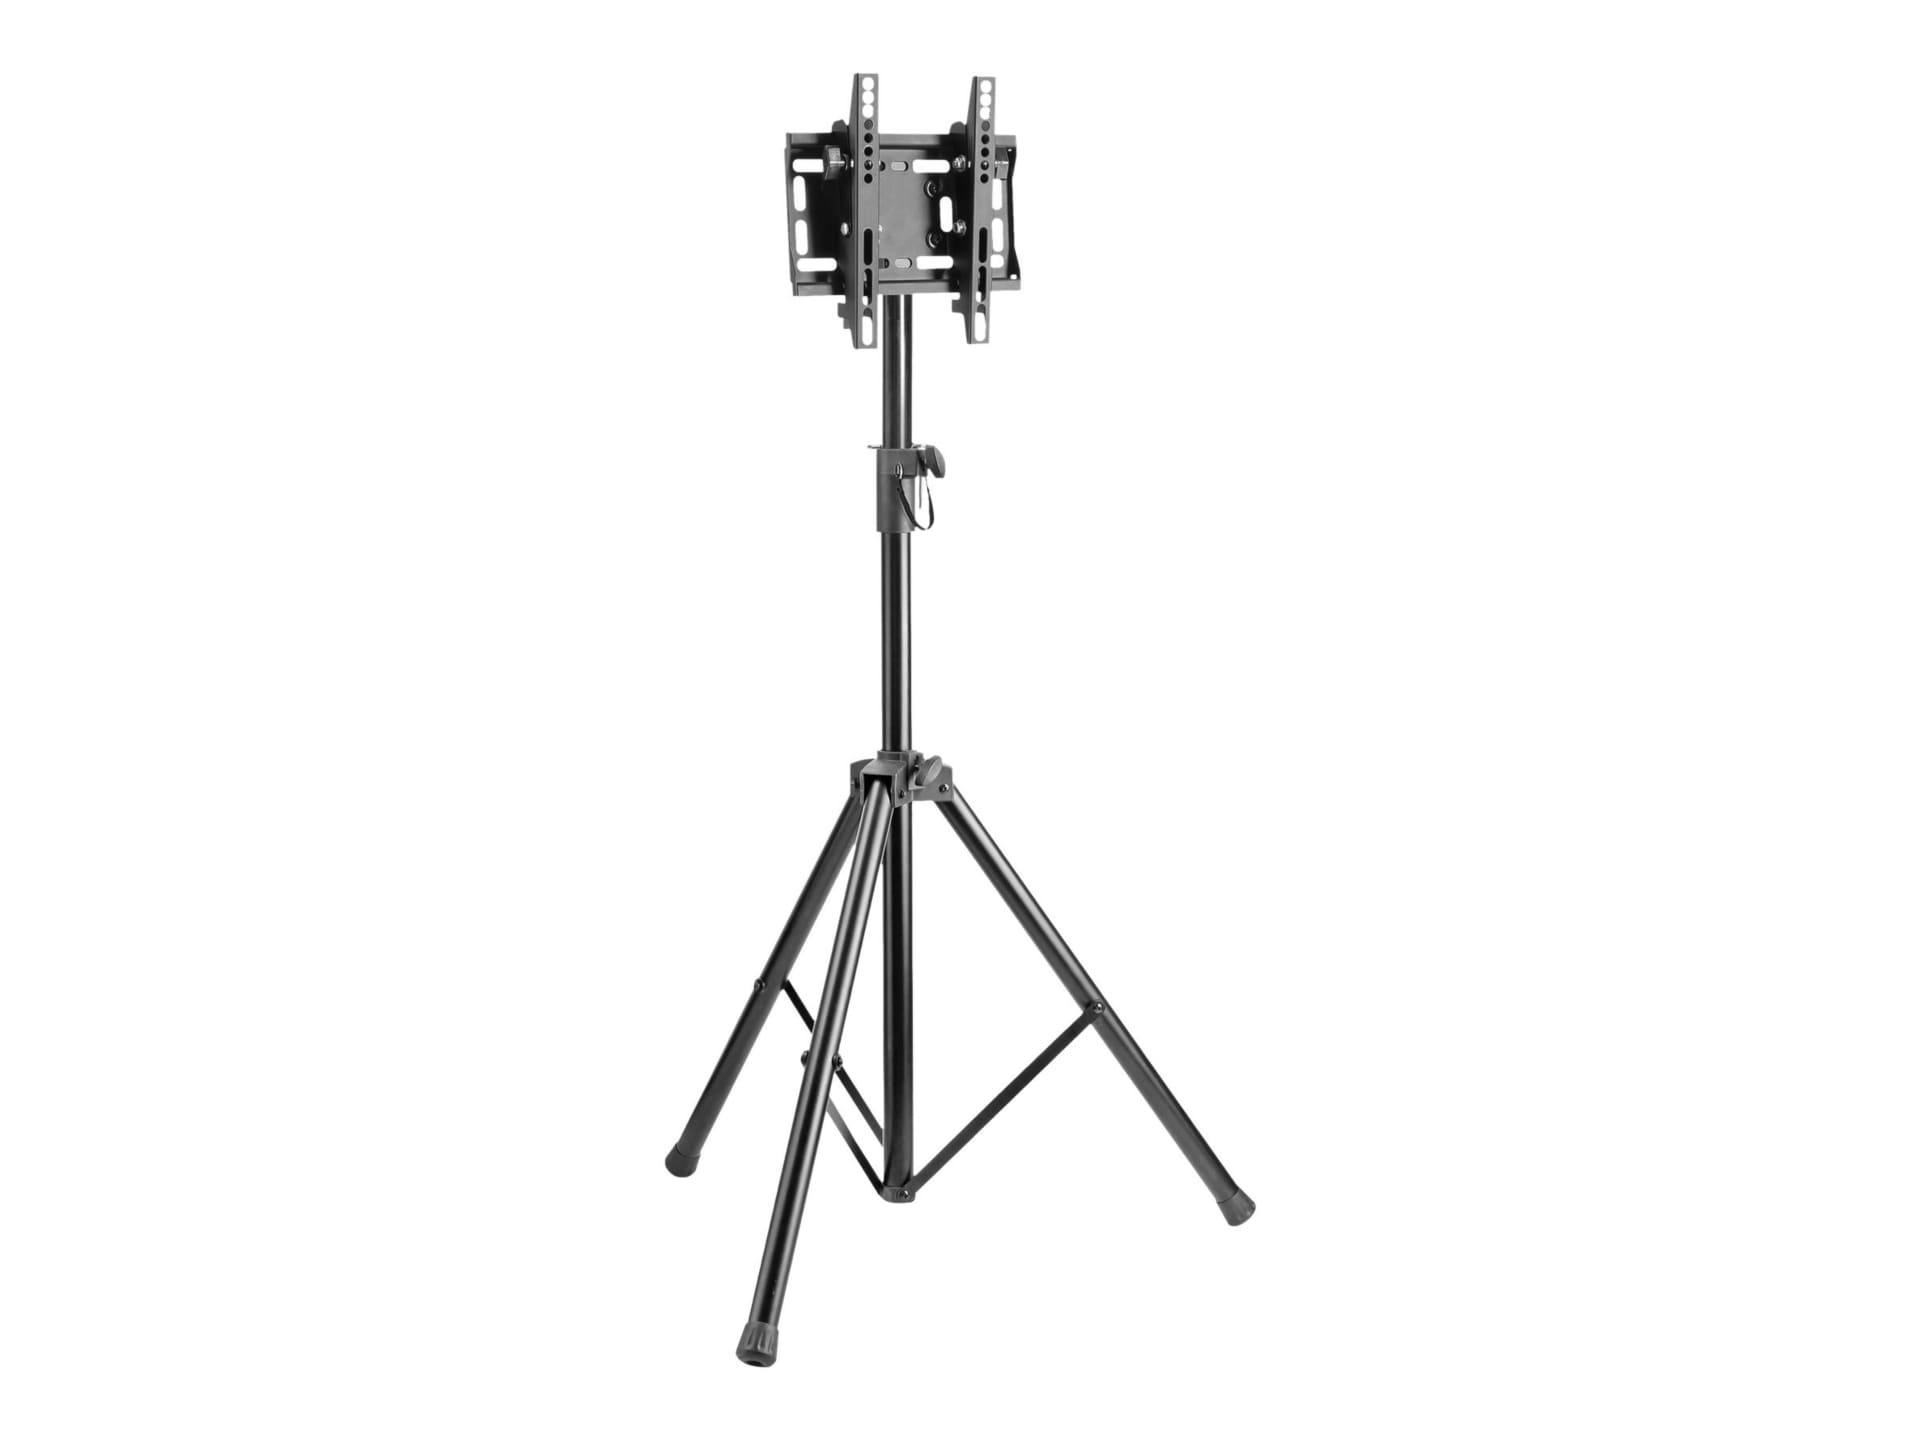 Tripp Lite Portable TV Monitor Digital Signage Stand Tripod 23-42in Display - stand - portable - for flat panel - black